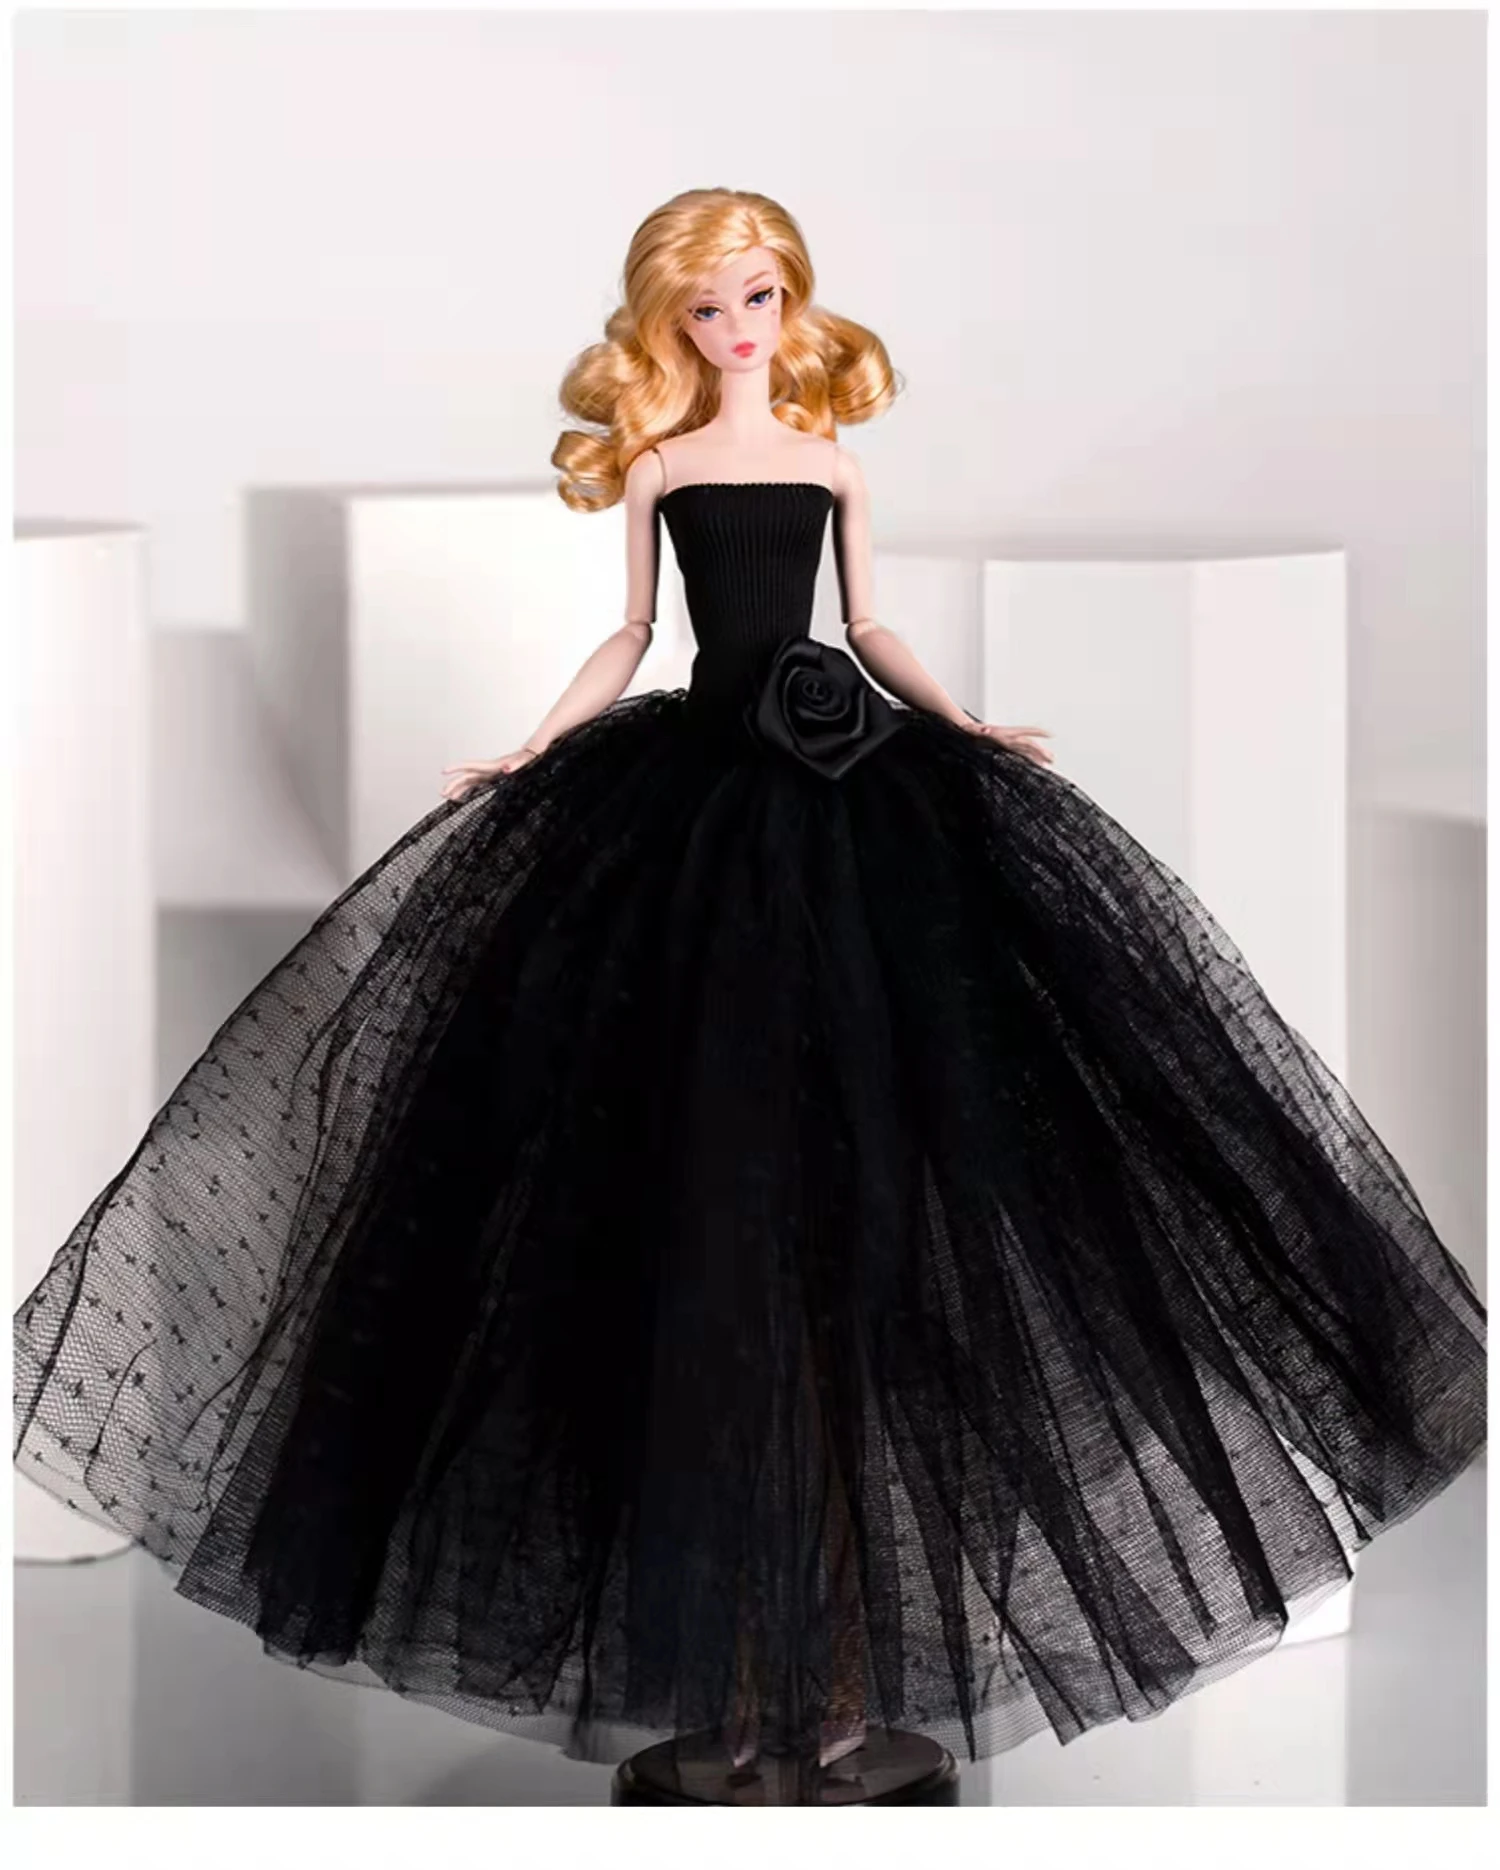 Black Fashion Princess Dress Wedding Clothes/Gown For 11.5in.Doll S289 